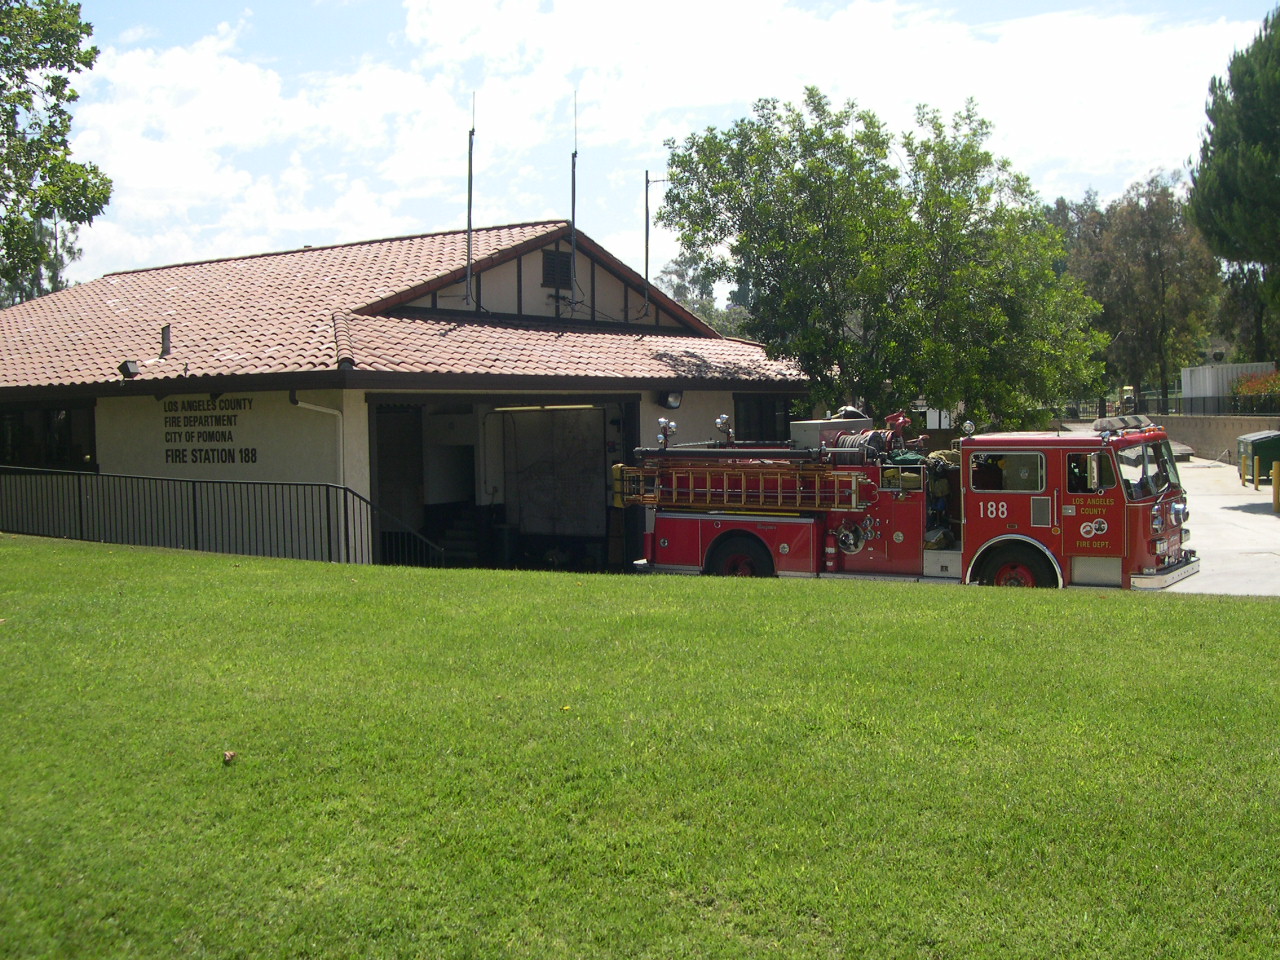 Firetruck 188 parked outside of its' station. Beautiful grass and trees surrounds the truck.